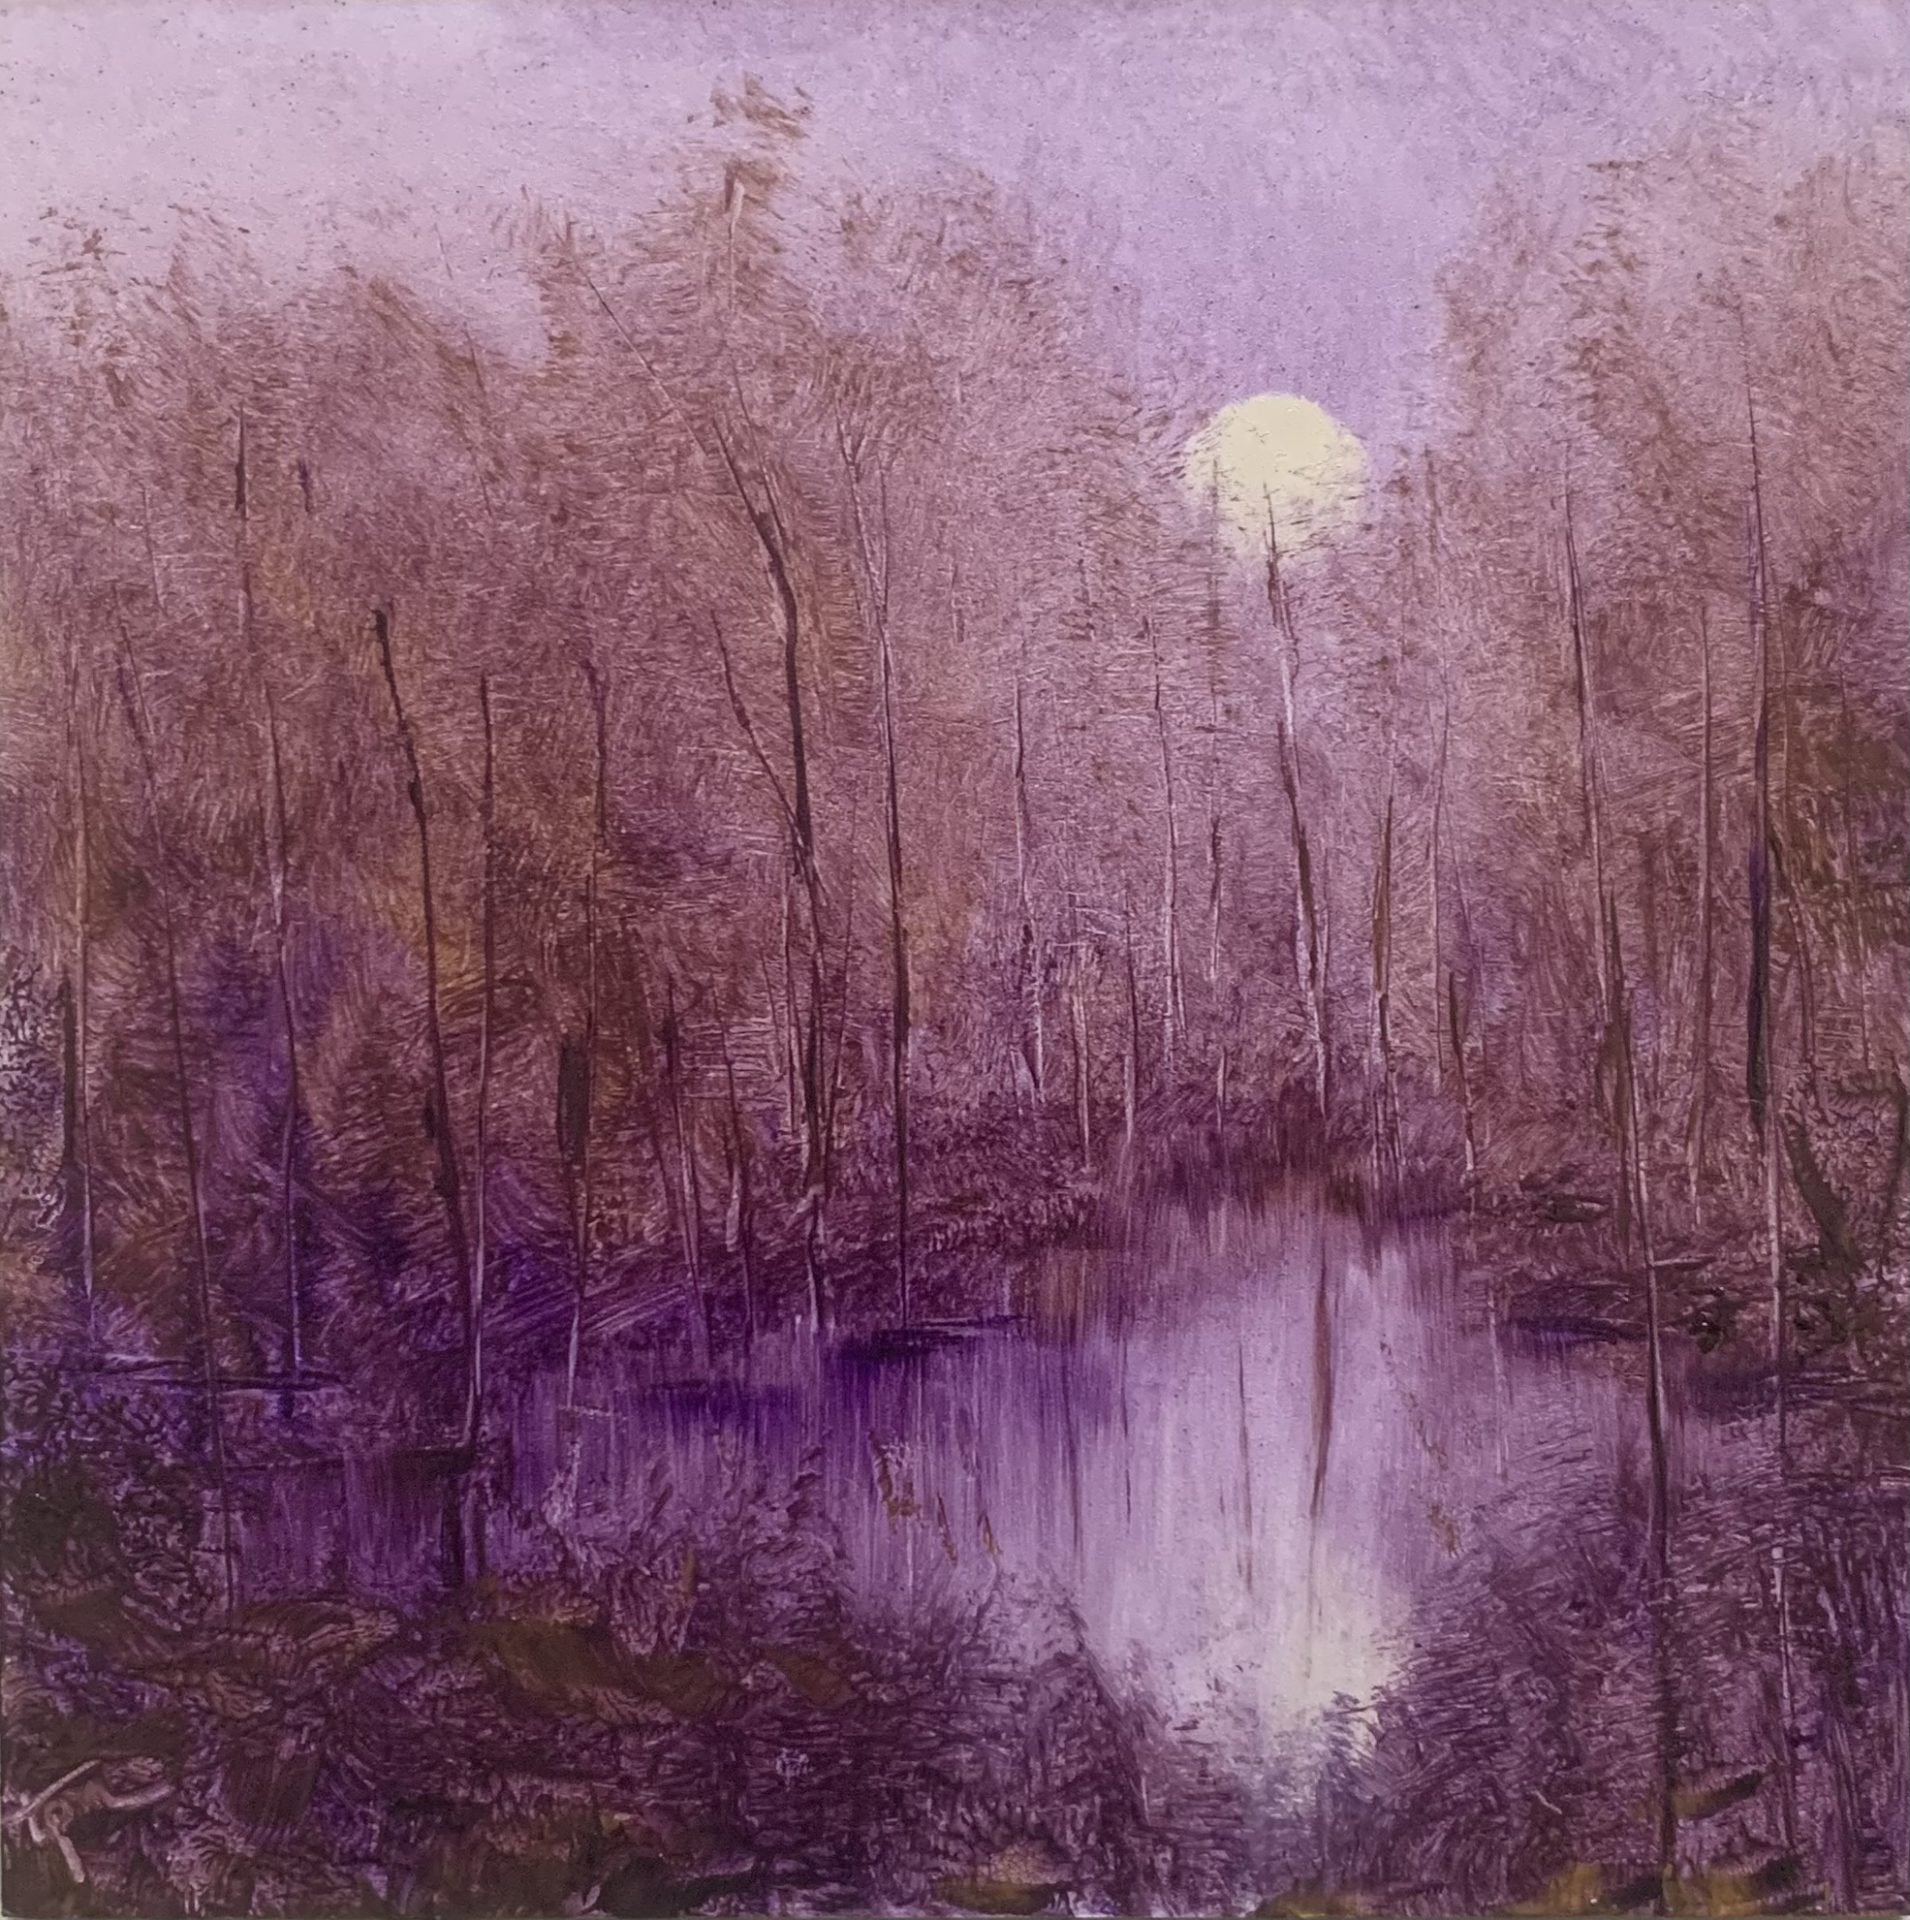 Original landscape oil painting by Tisha Mark, Week 5, 52 Weeks of Finding Light Series, 6"x6" oil on gessobord (2023). This nocturne painting features a full moon rising over a treeline and reflecting in a body of water. Painted in a limited palette of purple tones with ochre and light yellow.